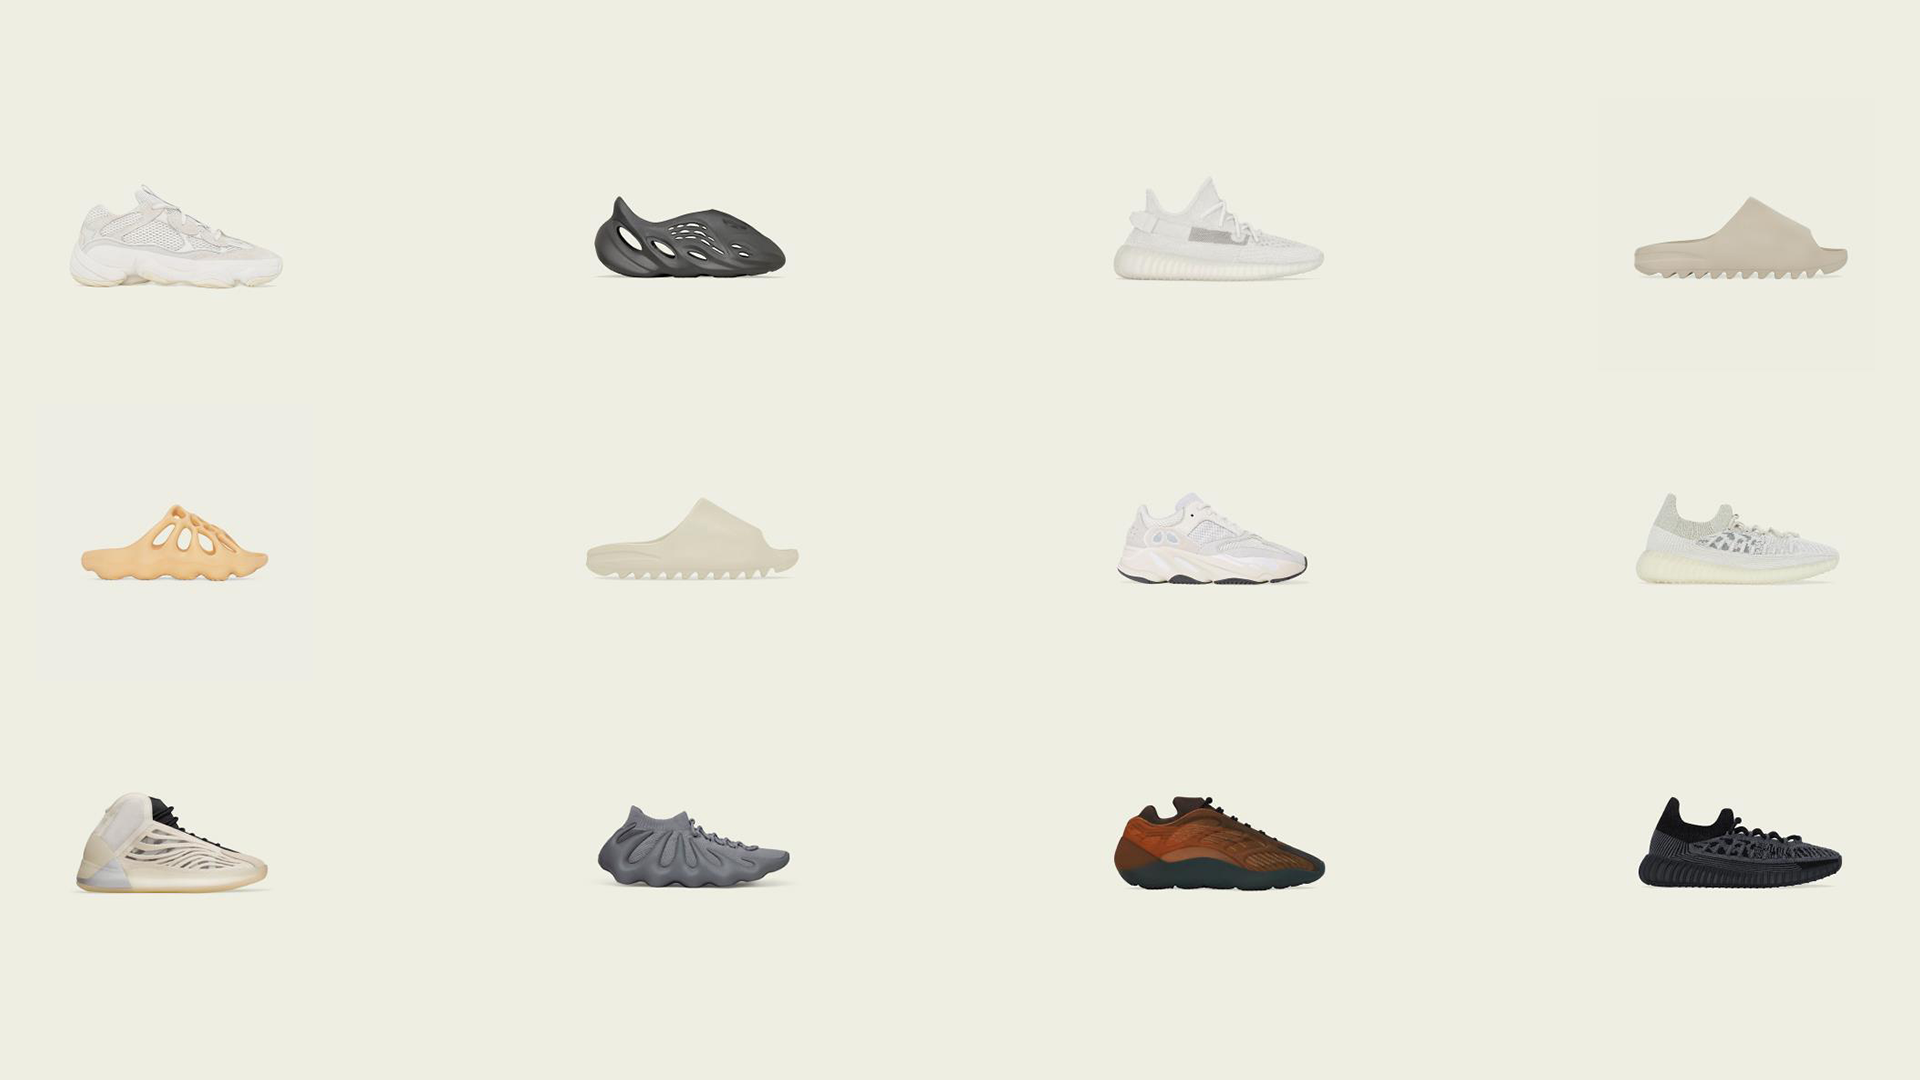 pels han gå i stå Here's Every Yeezy Dropping In August | The Sole Supplier